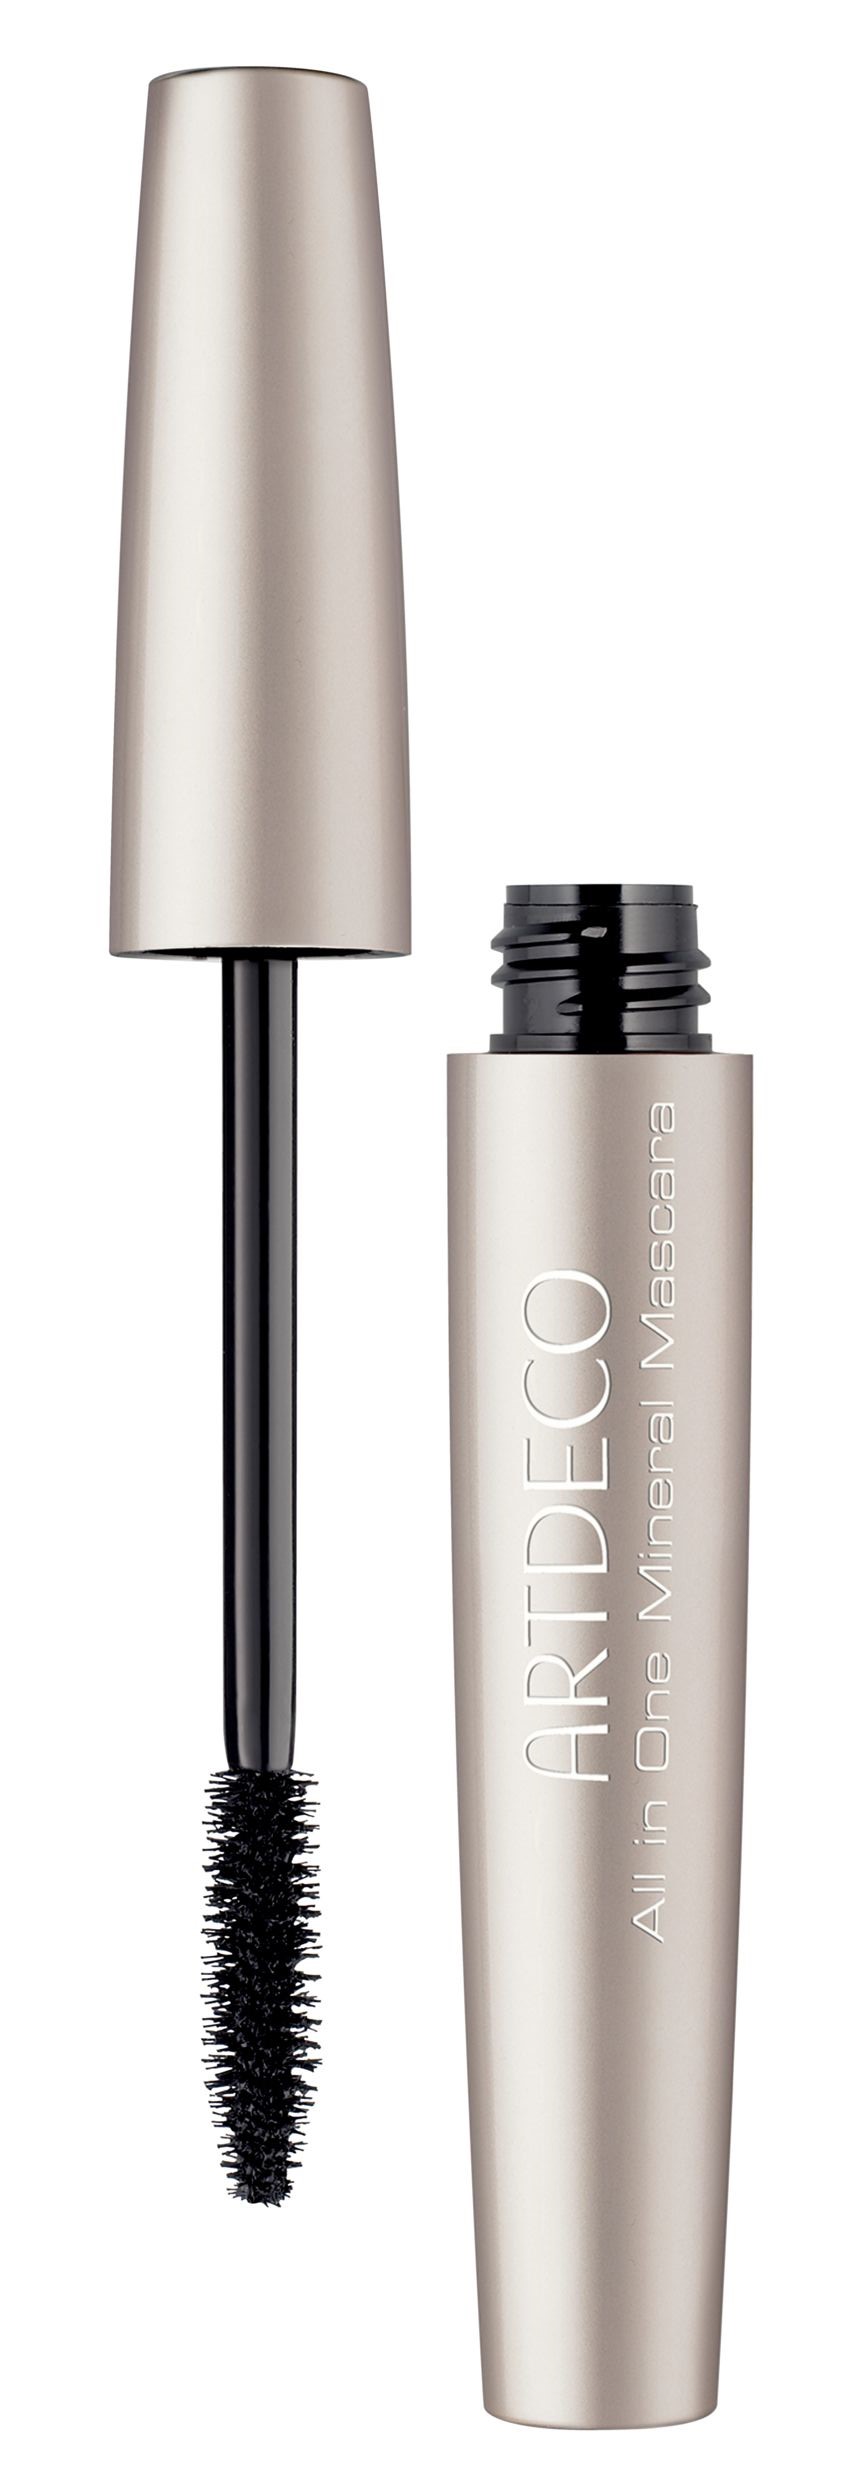 Mineral All-in-One Mascara #1 black